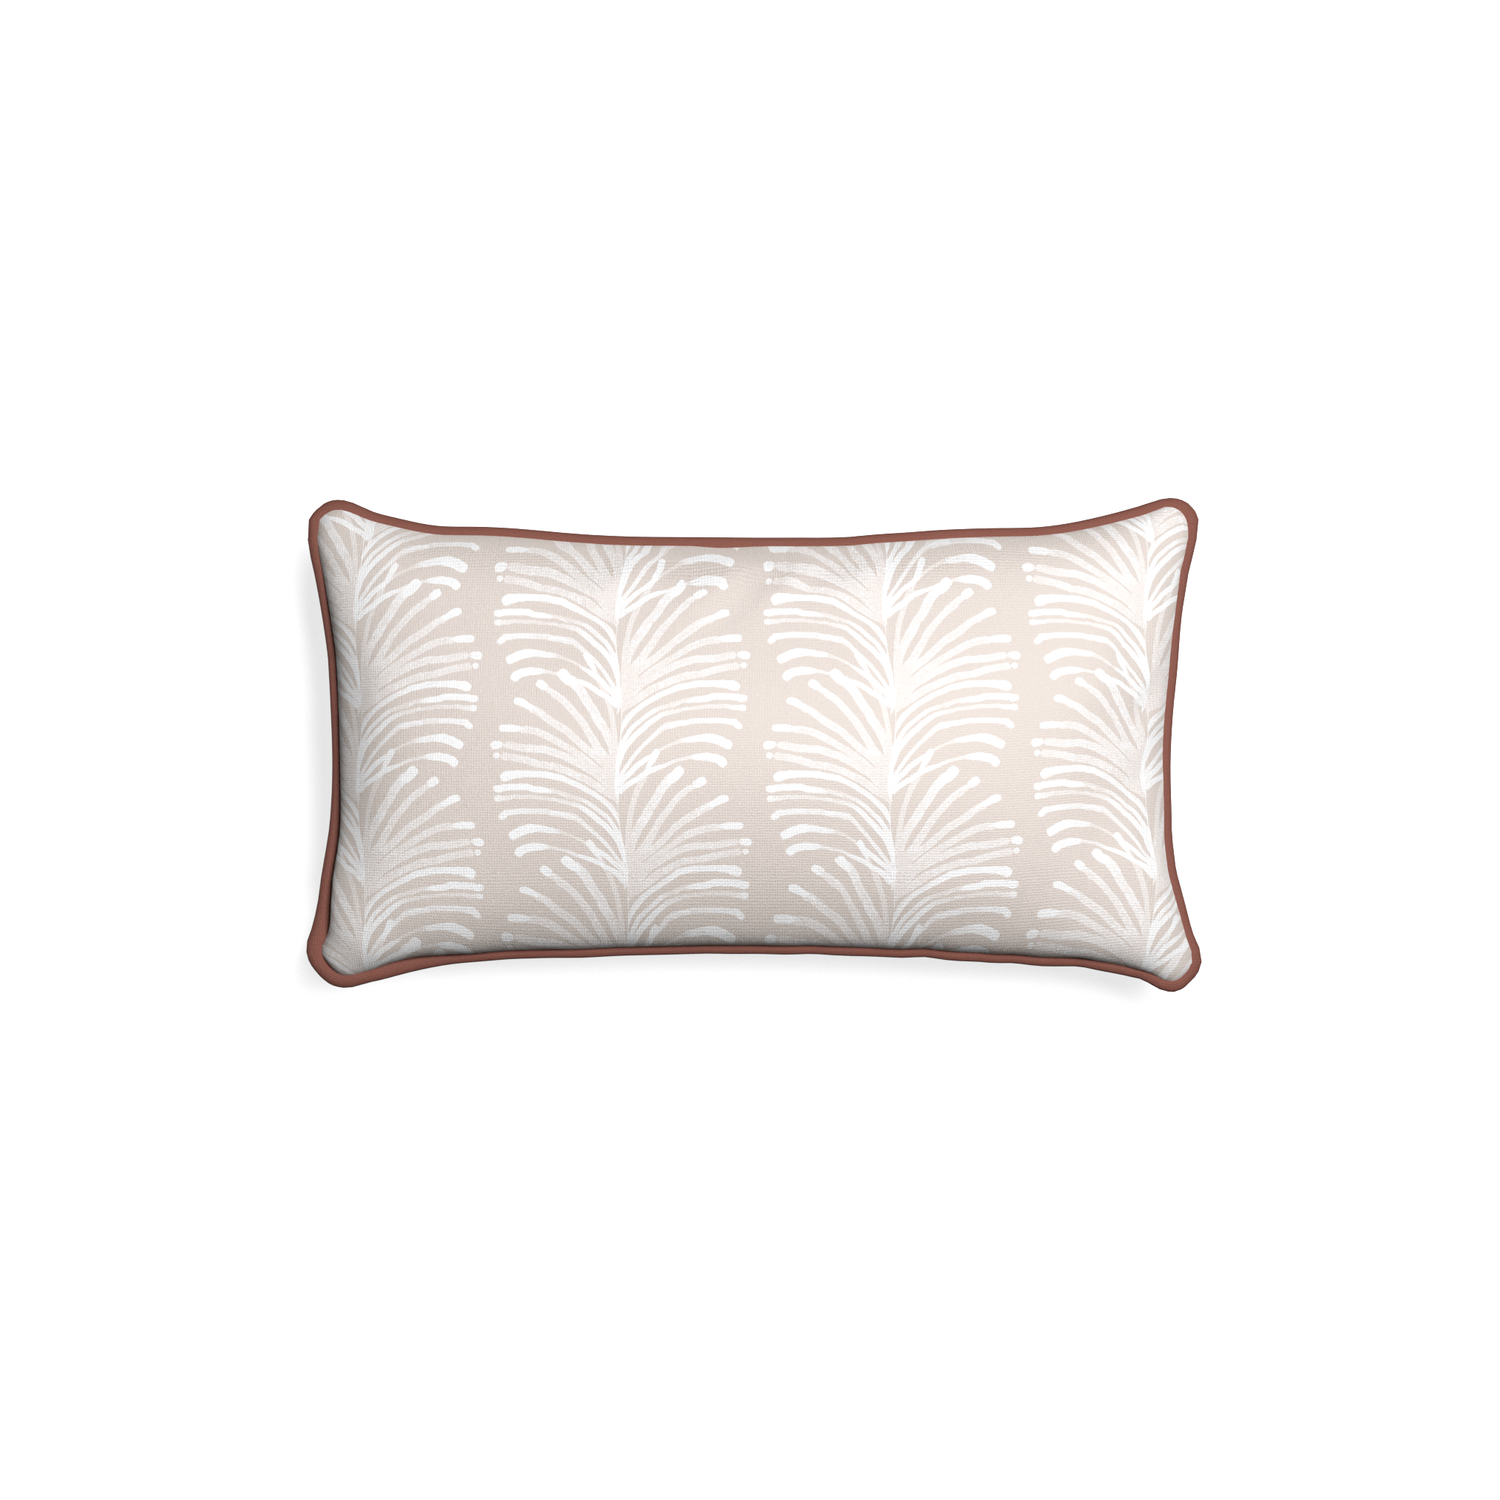 Petite-lumbar emma sand custom sand colored botanical stripepillow with w piping on white background